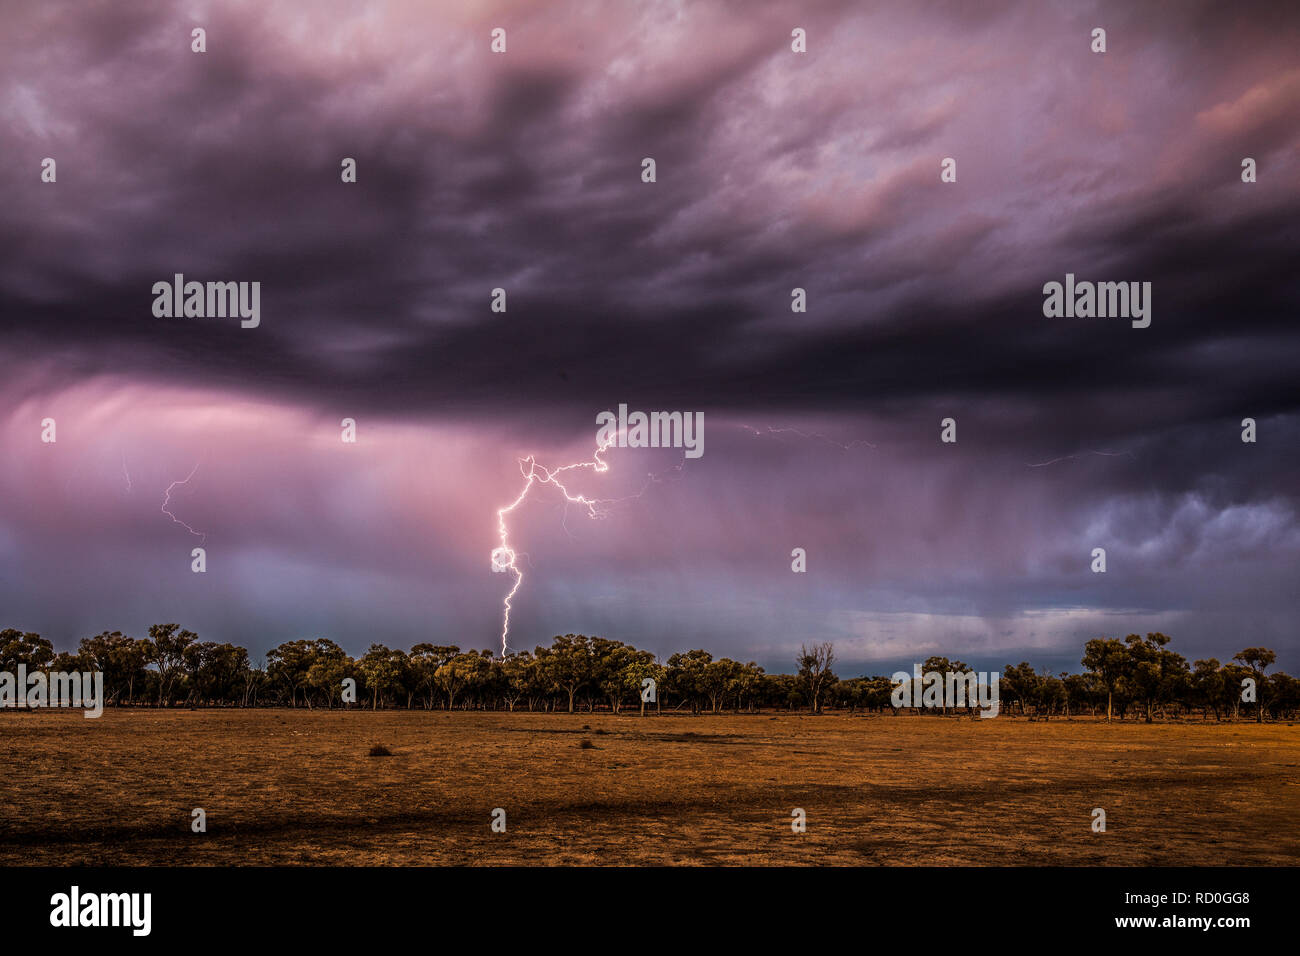 Thunderstorm in the outback, Queensland, Australia Stock Photo